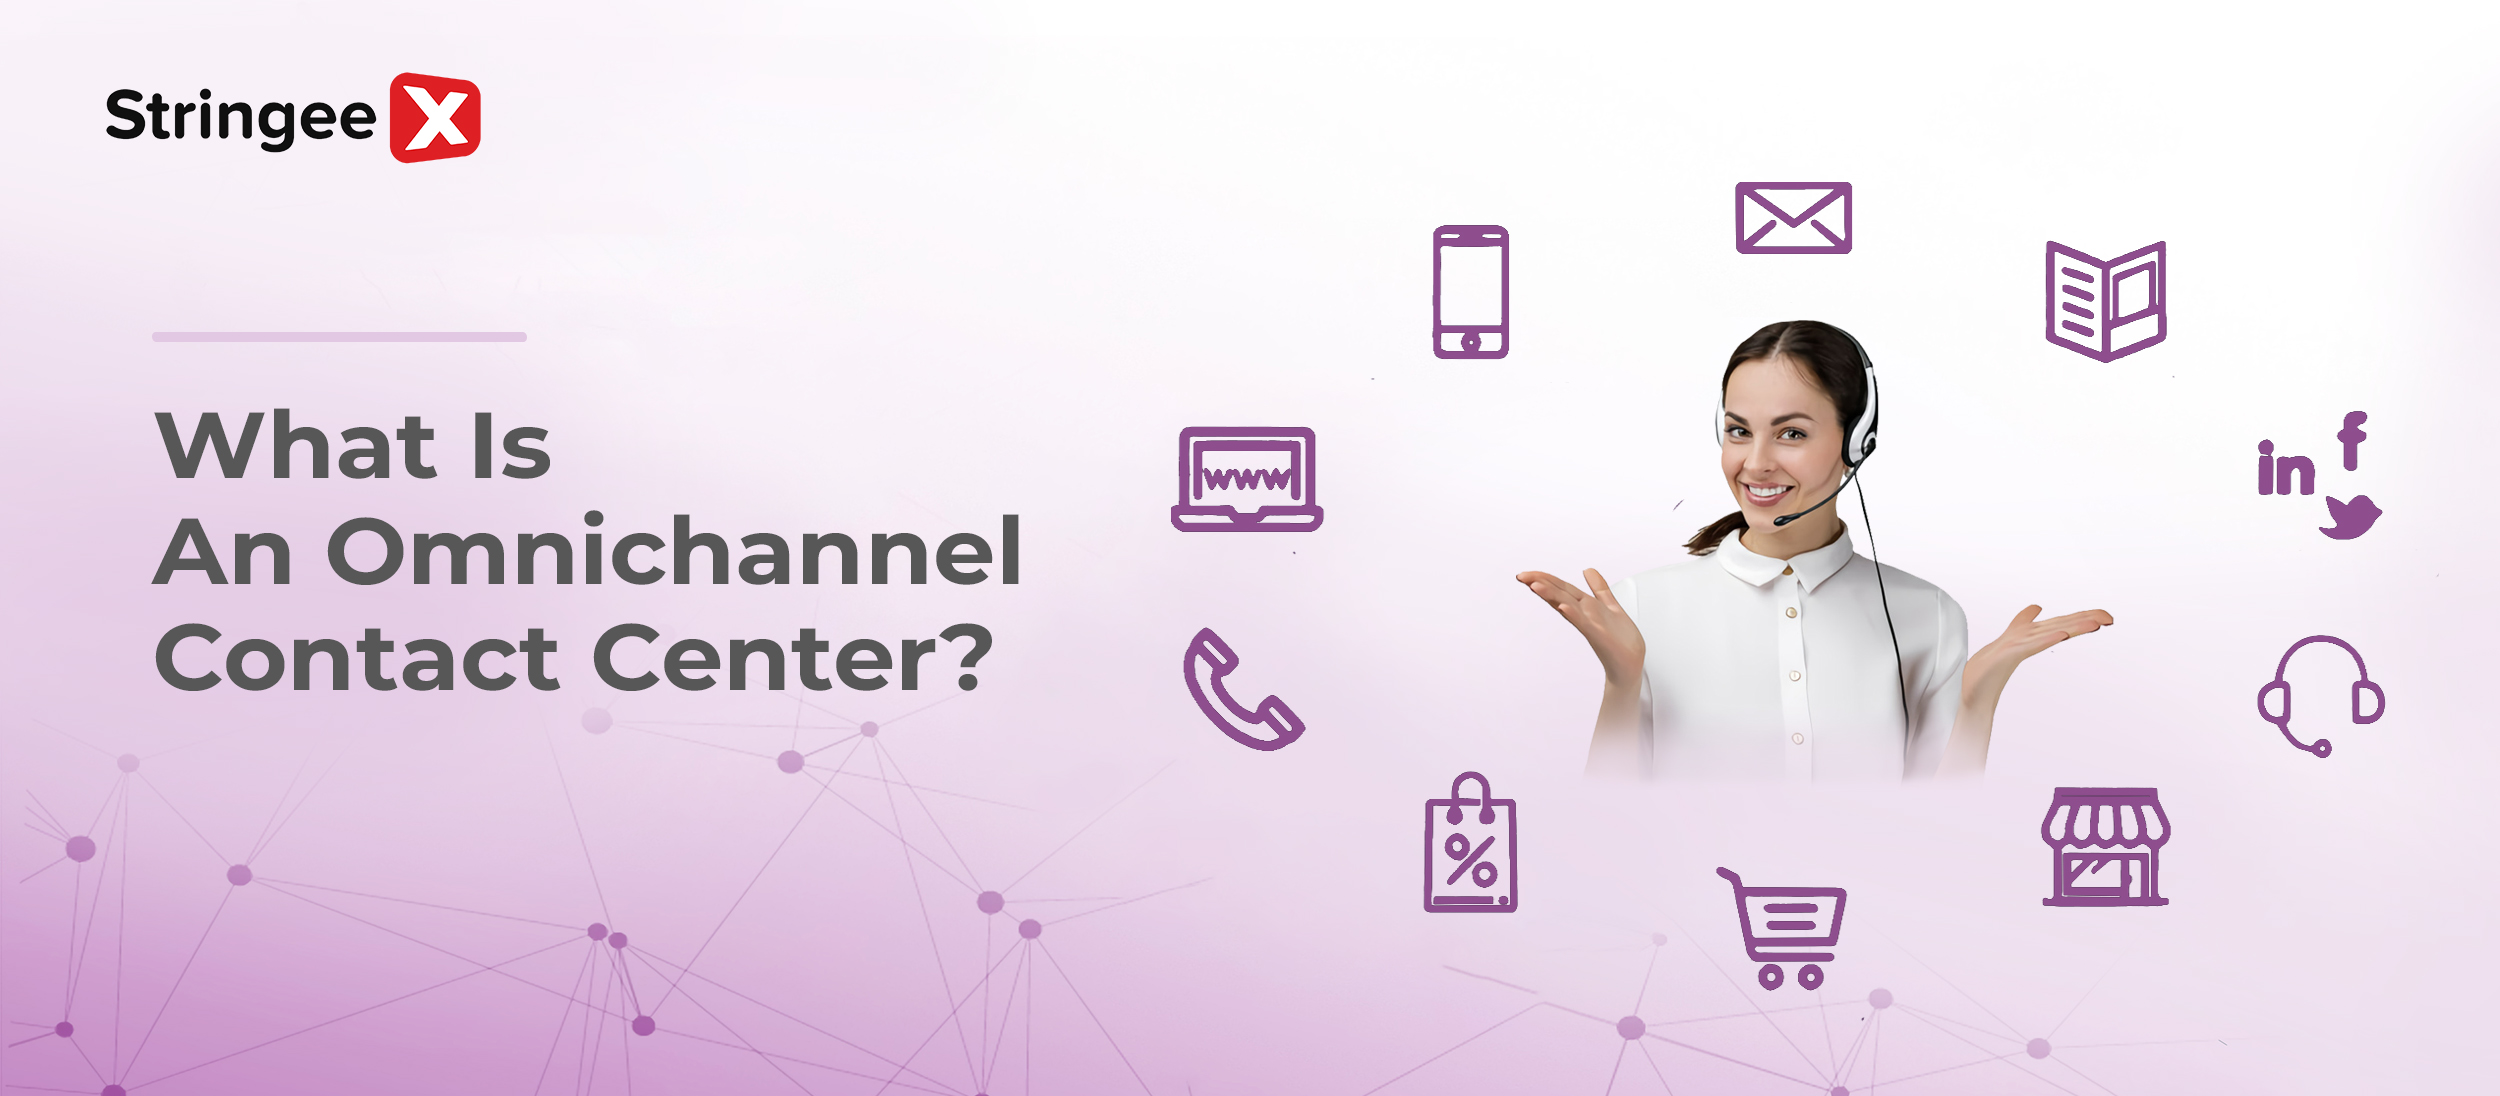 What Is An Omnichannel Contact Center?